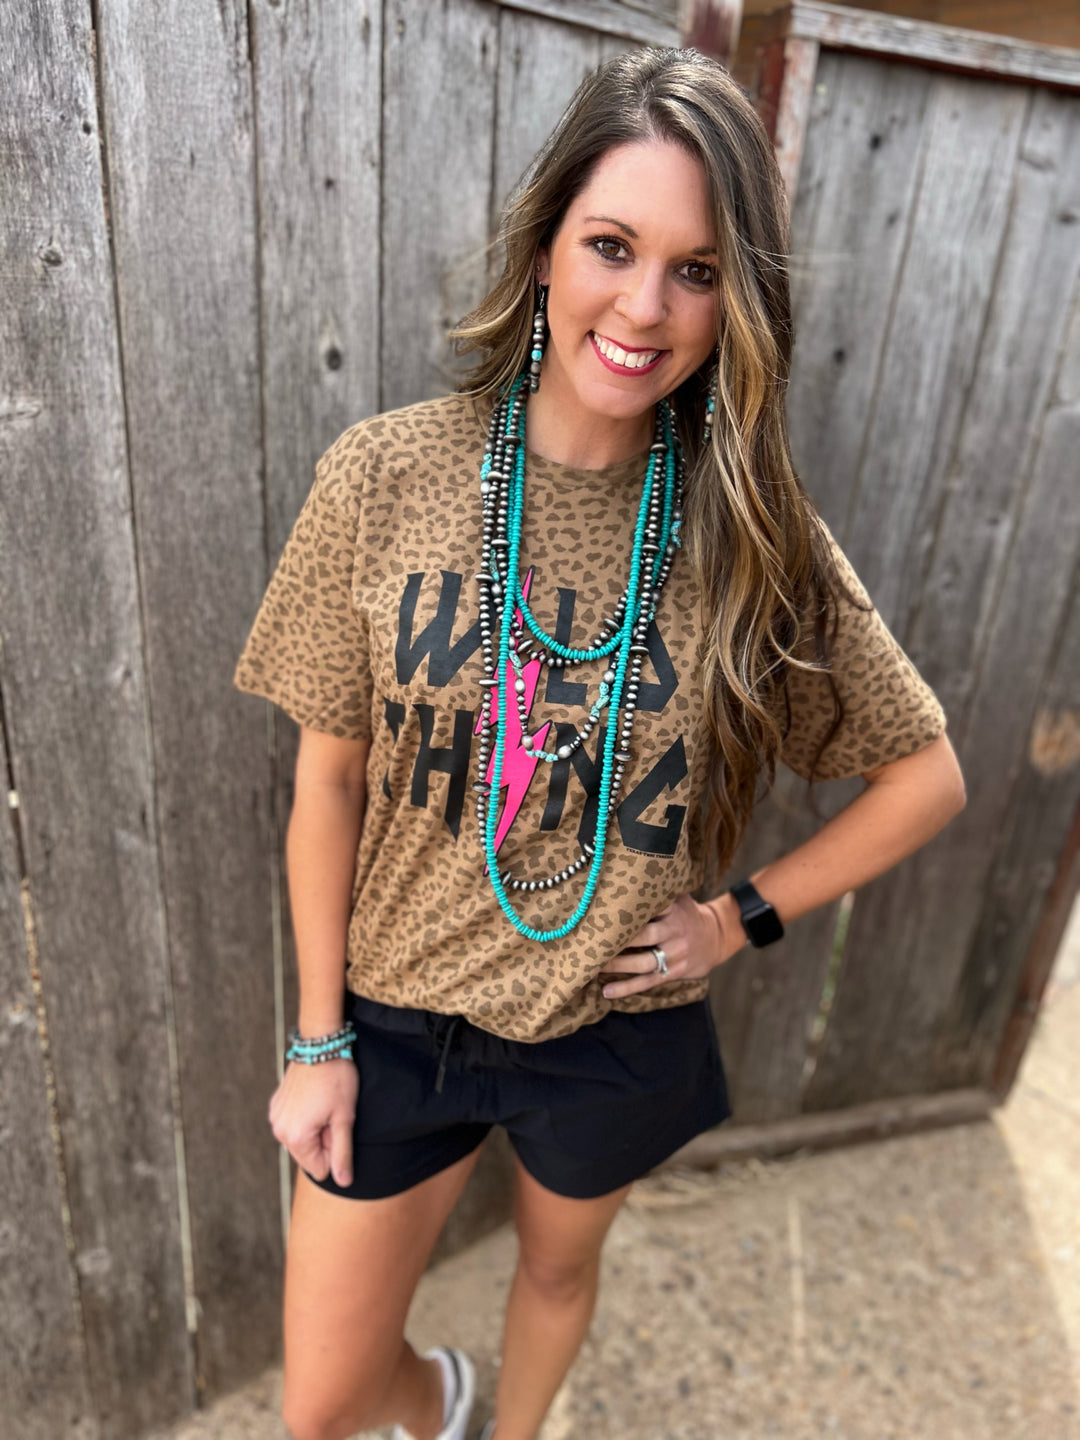 Wild Thing Tan Leopard Graphic Tee by Texas True Threads